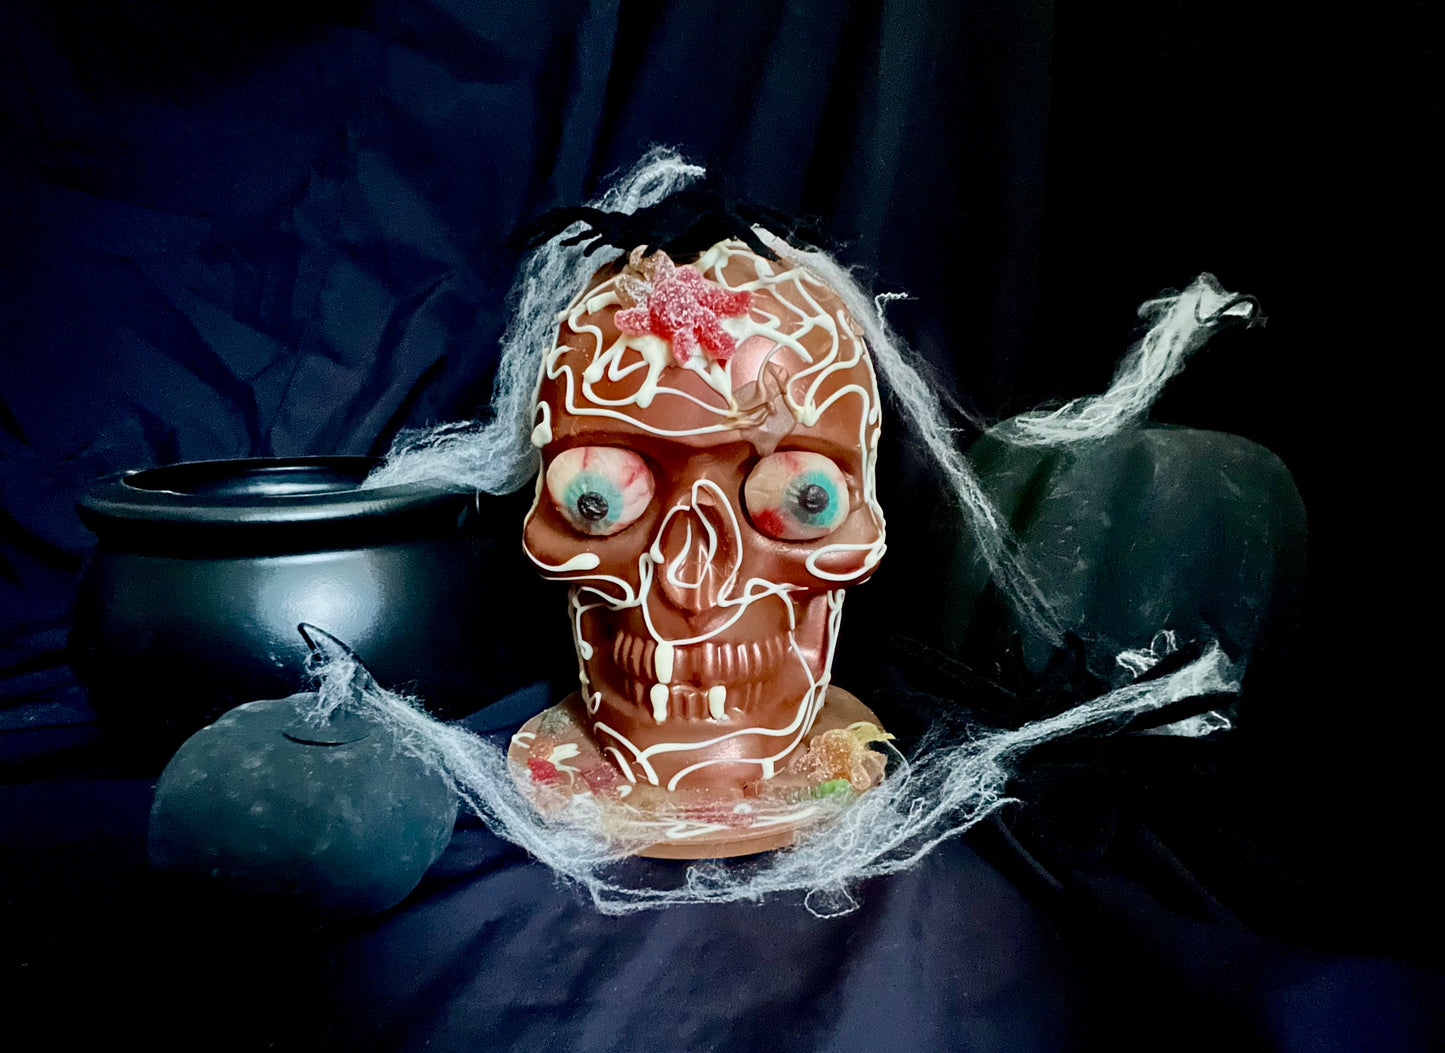 Life-size Hand Decorated Chocolate Skull filled with Toffee Popcorn